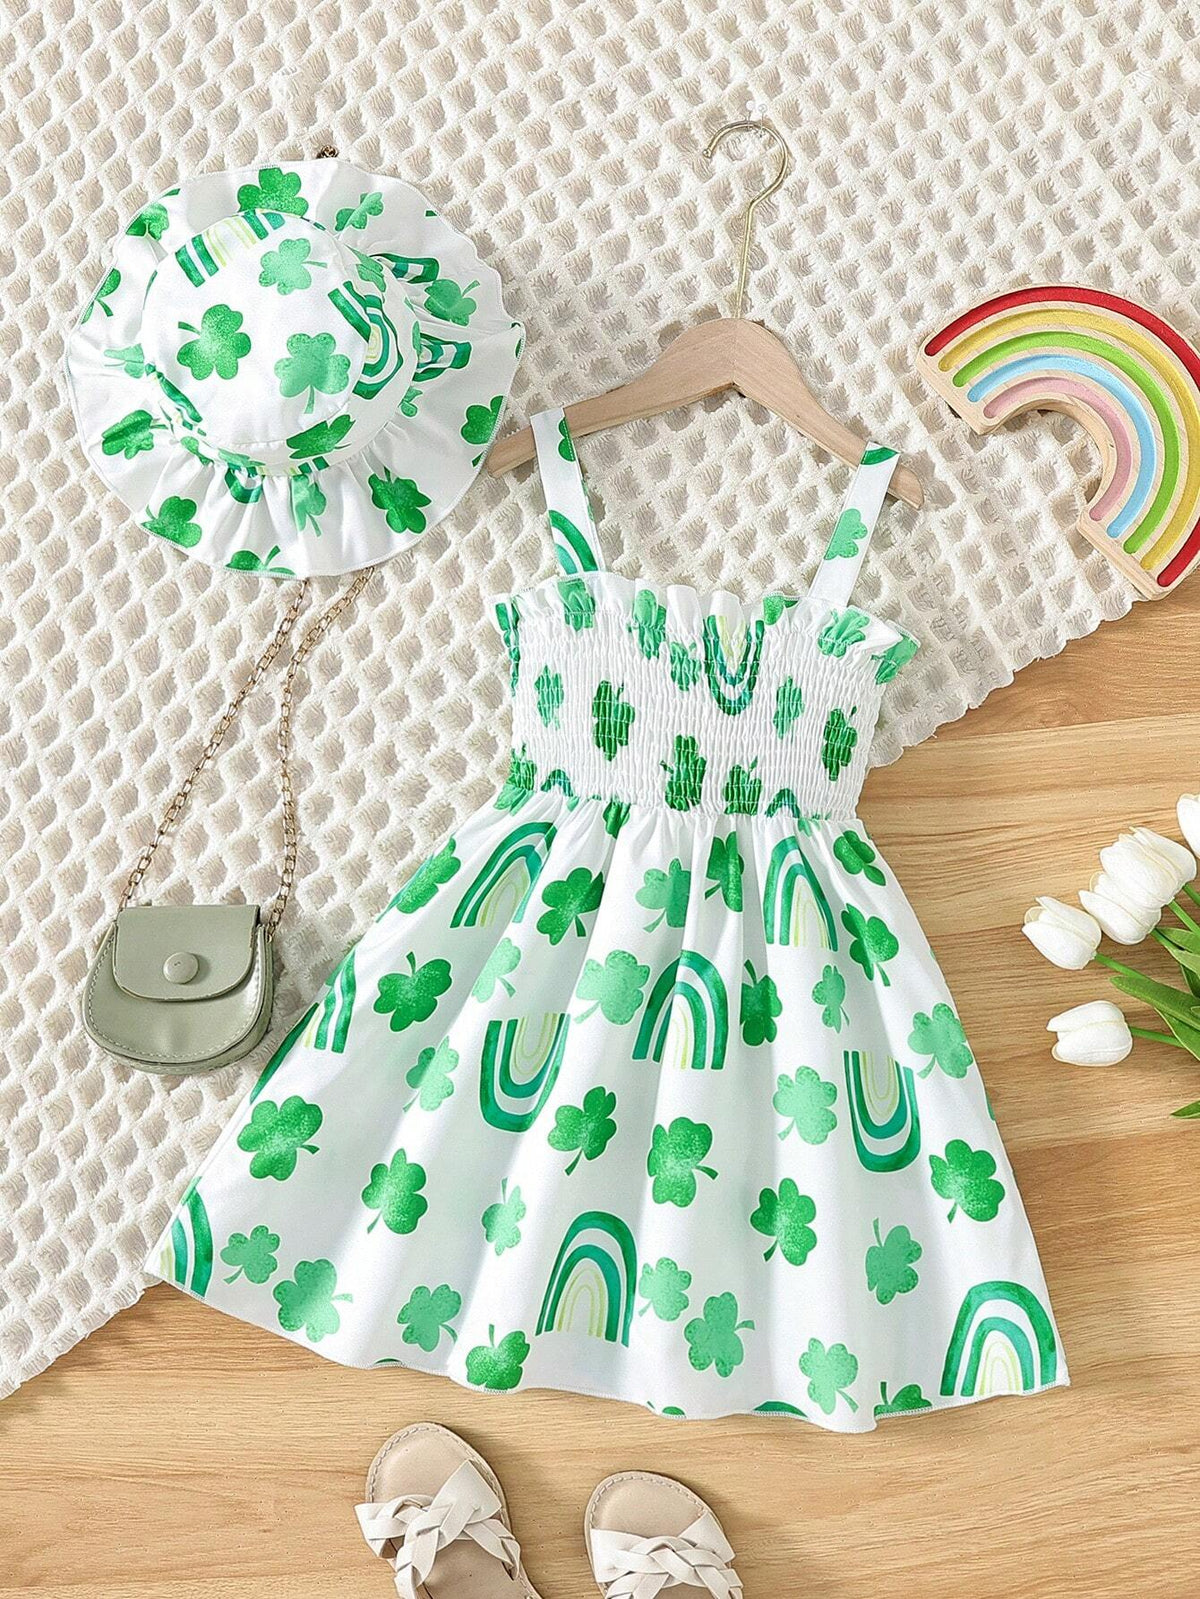 Young Girl's Holiday Style Green Clover Rainbow Pattern Fit & Shirred Cami Dress And Hairband Set, Suitable For St. Patrick's Day Summer Outfit